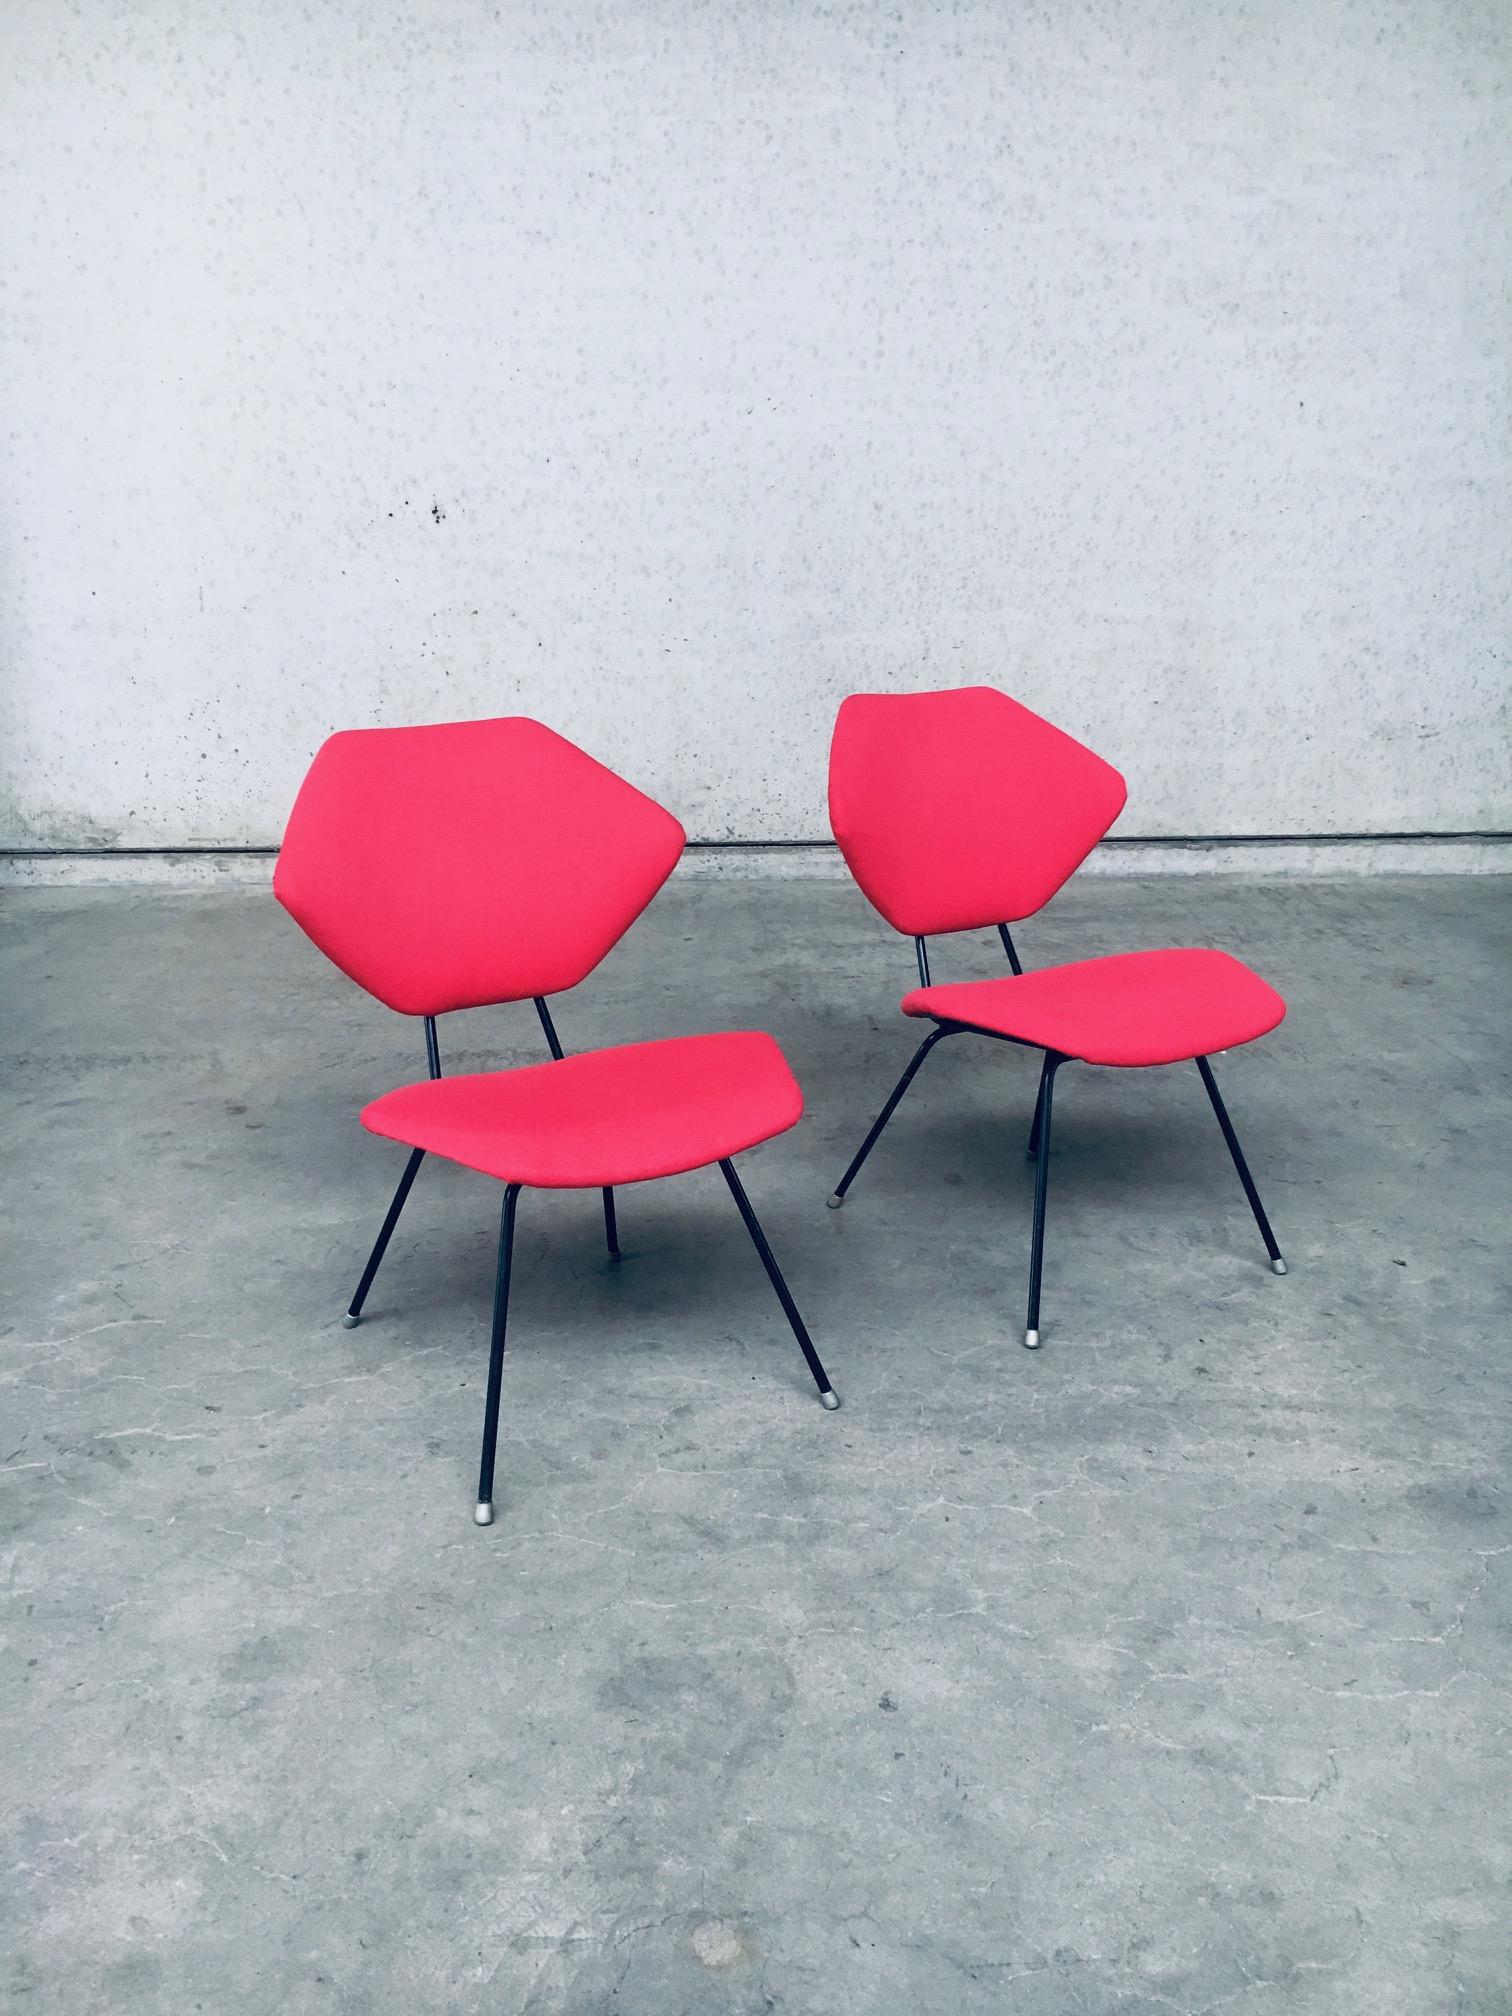 Vintage Mid-Century Modern design low chair set of 2 in the style of Augusto Bozzi. Made in Italy, 1950s. Black metal frame with recently reupholstered backrest and seat in red fabric. Nice low lounge side chairs which can be placed in the sitting